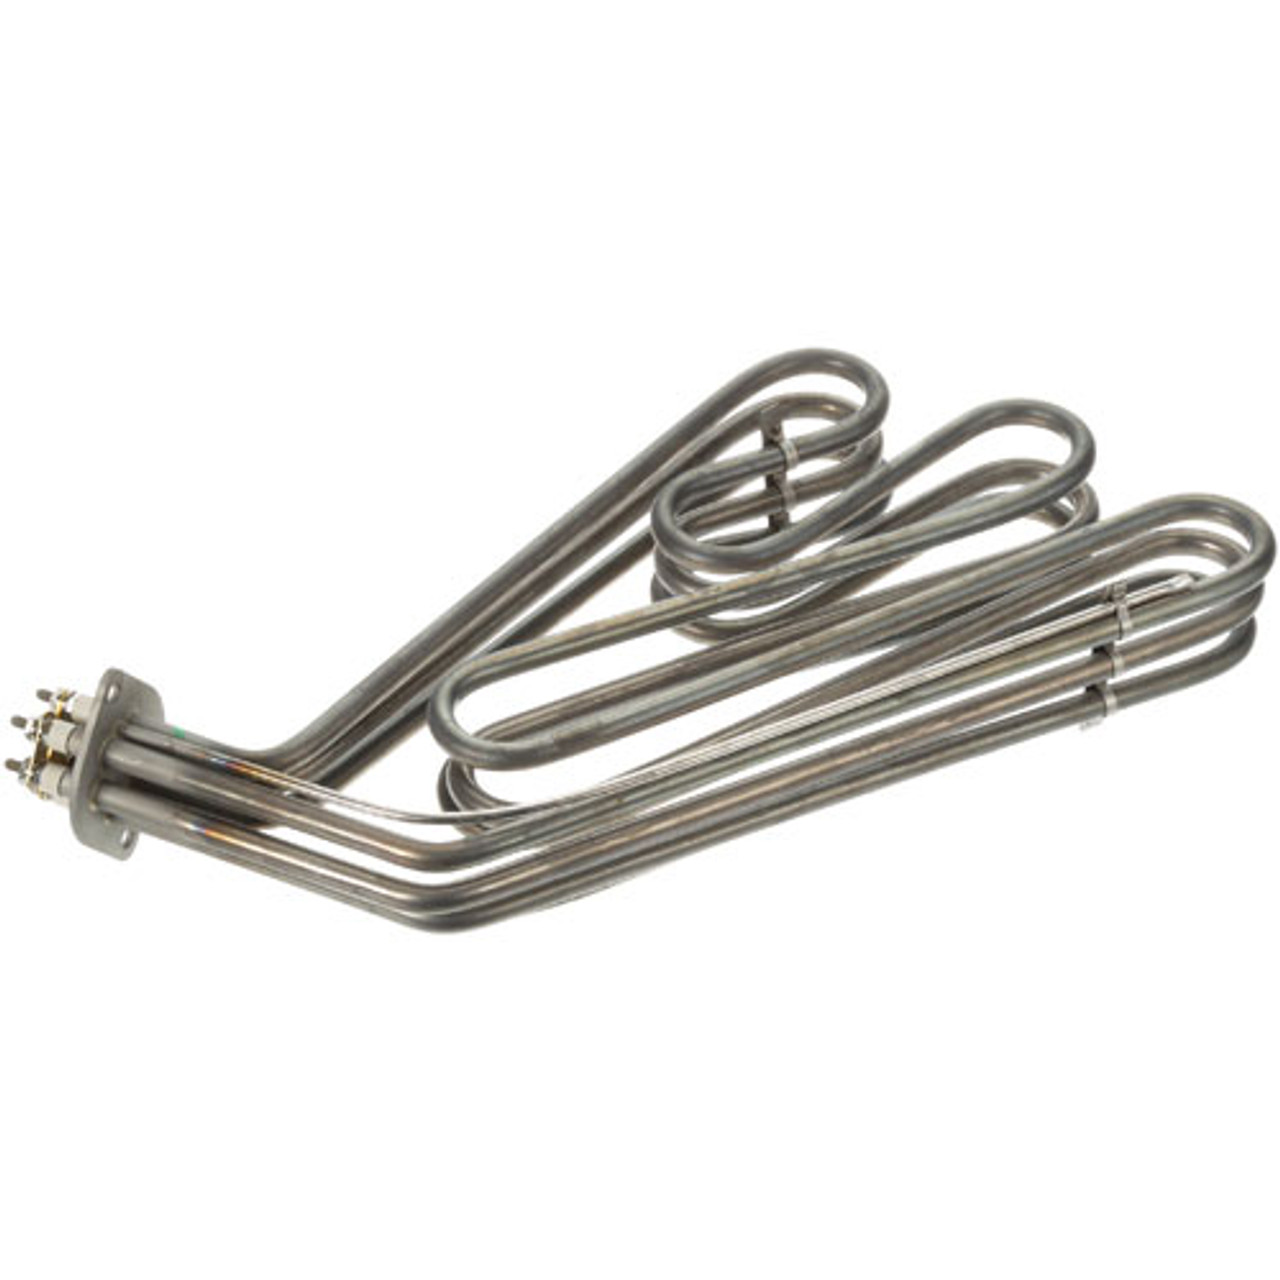 Heating Element - 200V/15Kw - Replacement Part For Hobart 892817-00001